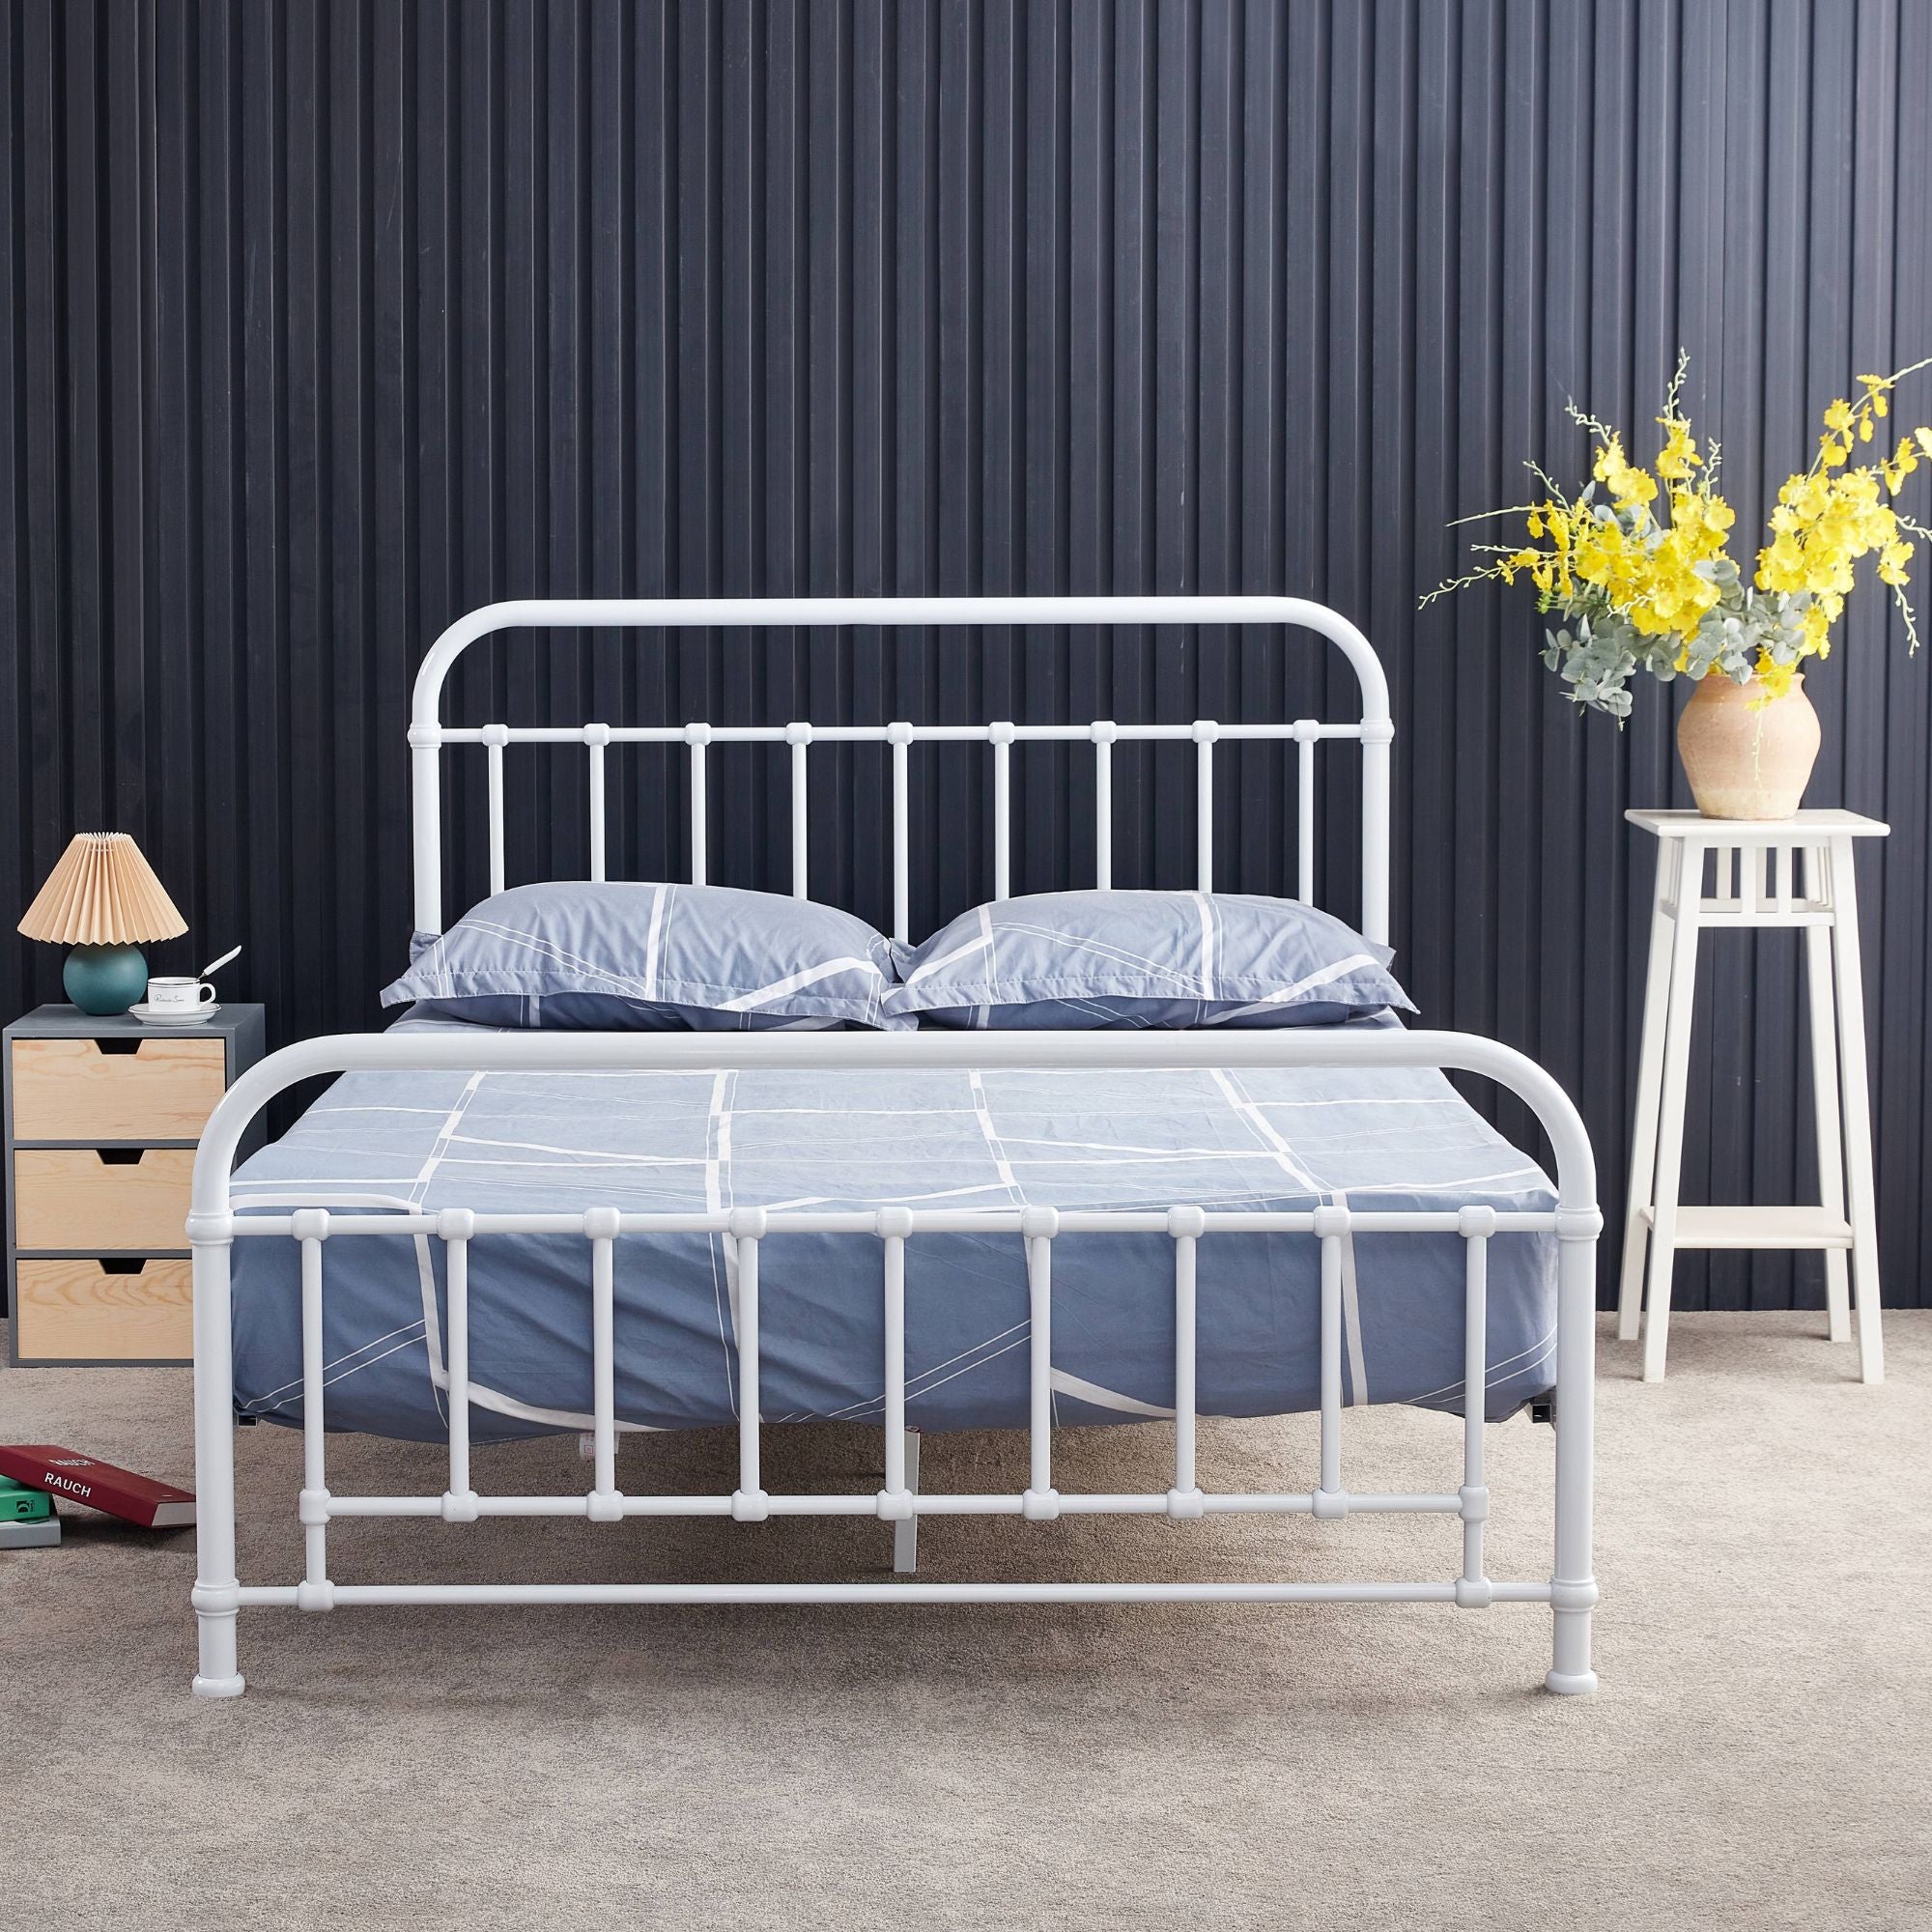 Back In Stock! King Single Size Metal Bed Frame - White